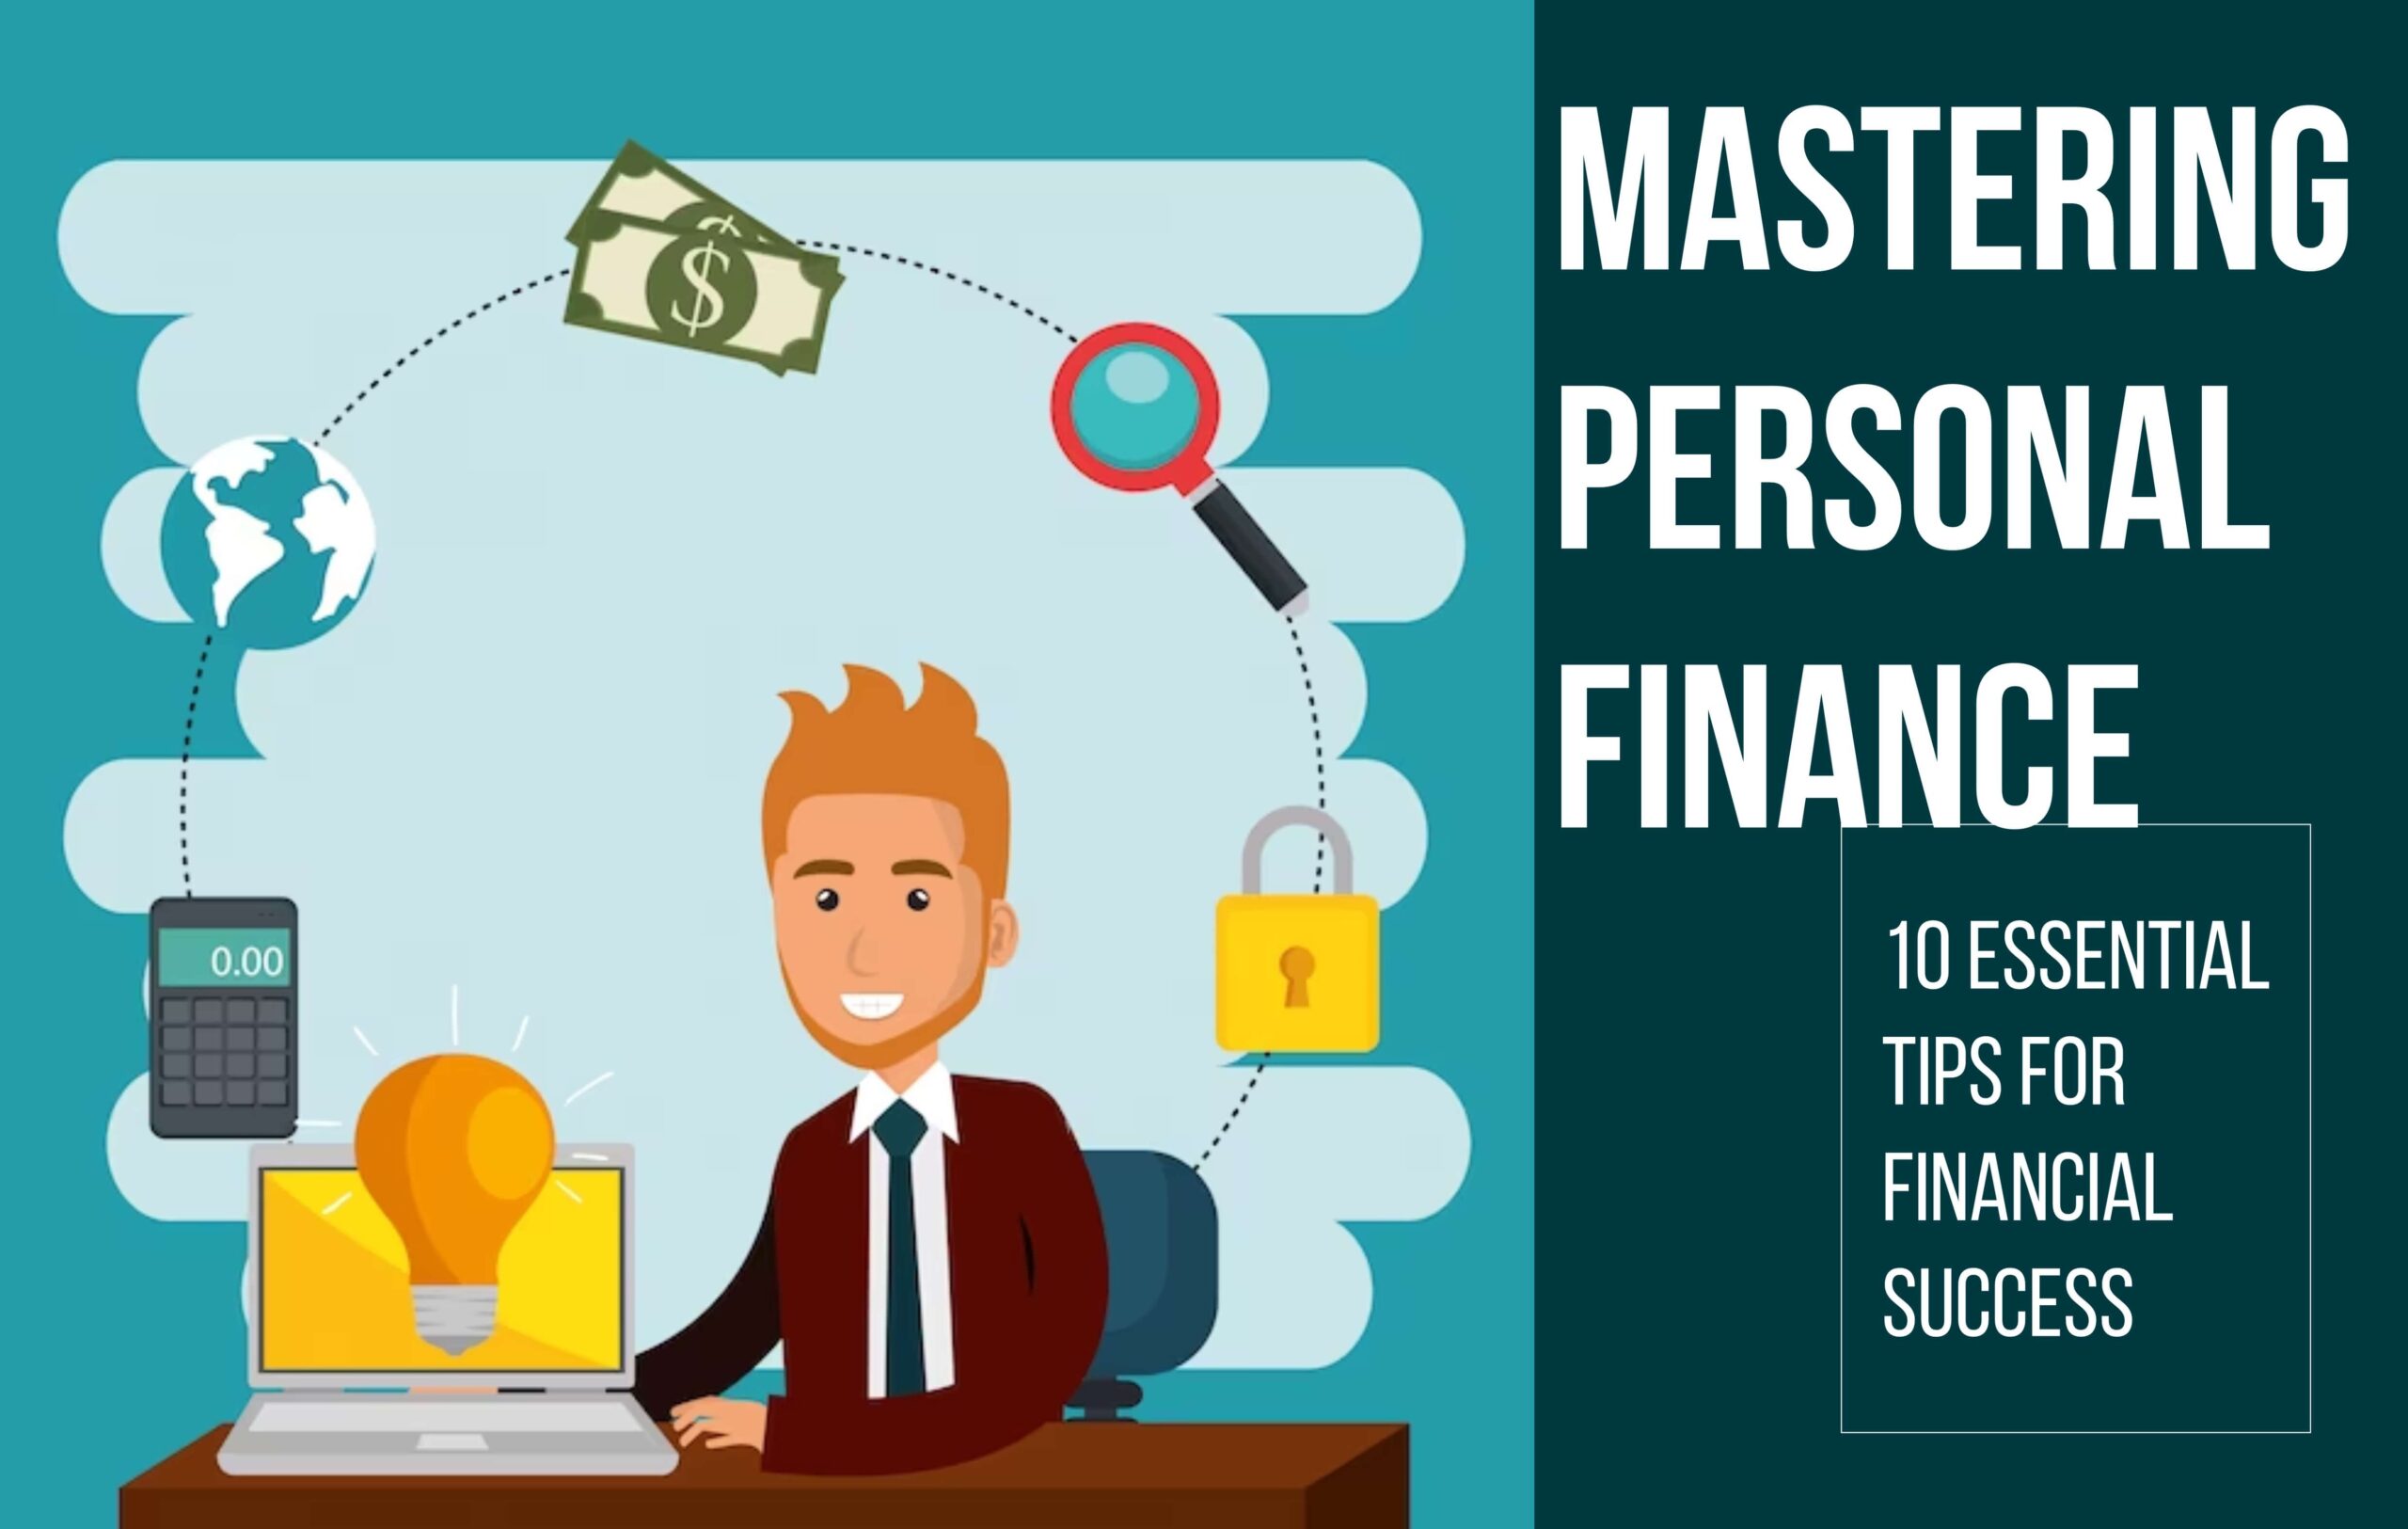 Mastering Personal Finance: 10 Essential Tips for Financial Success